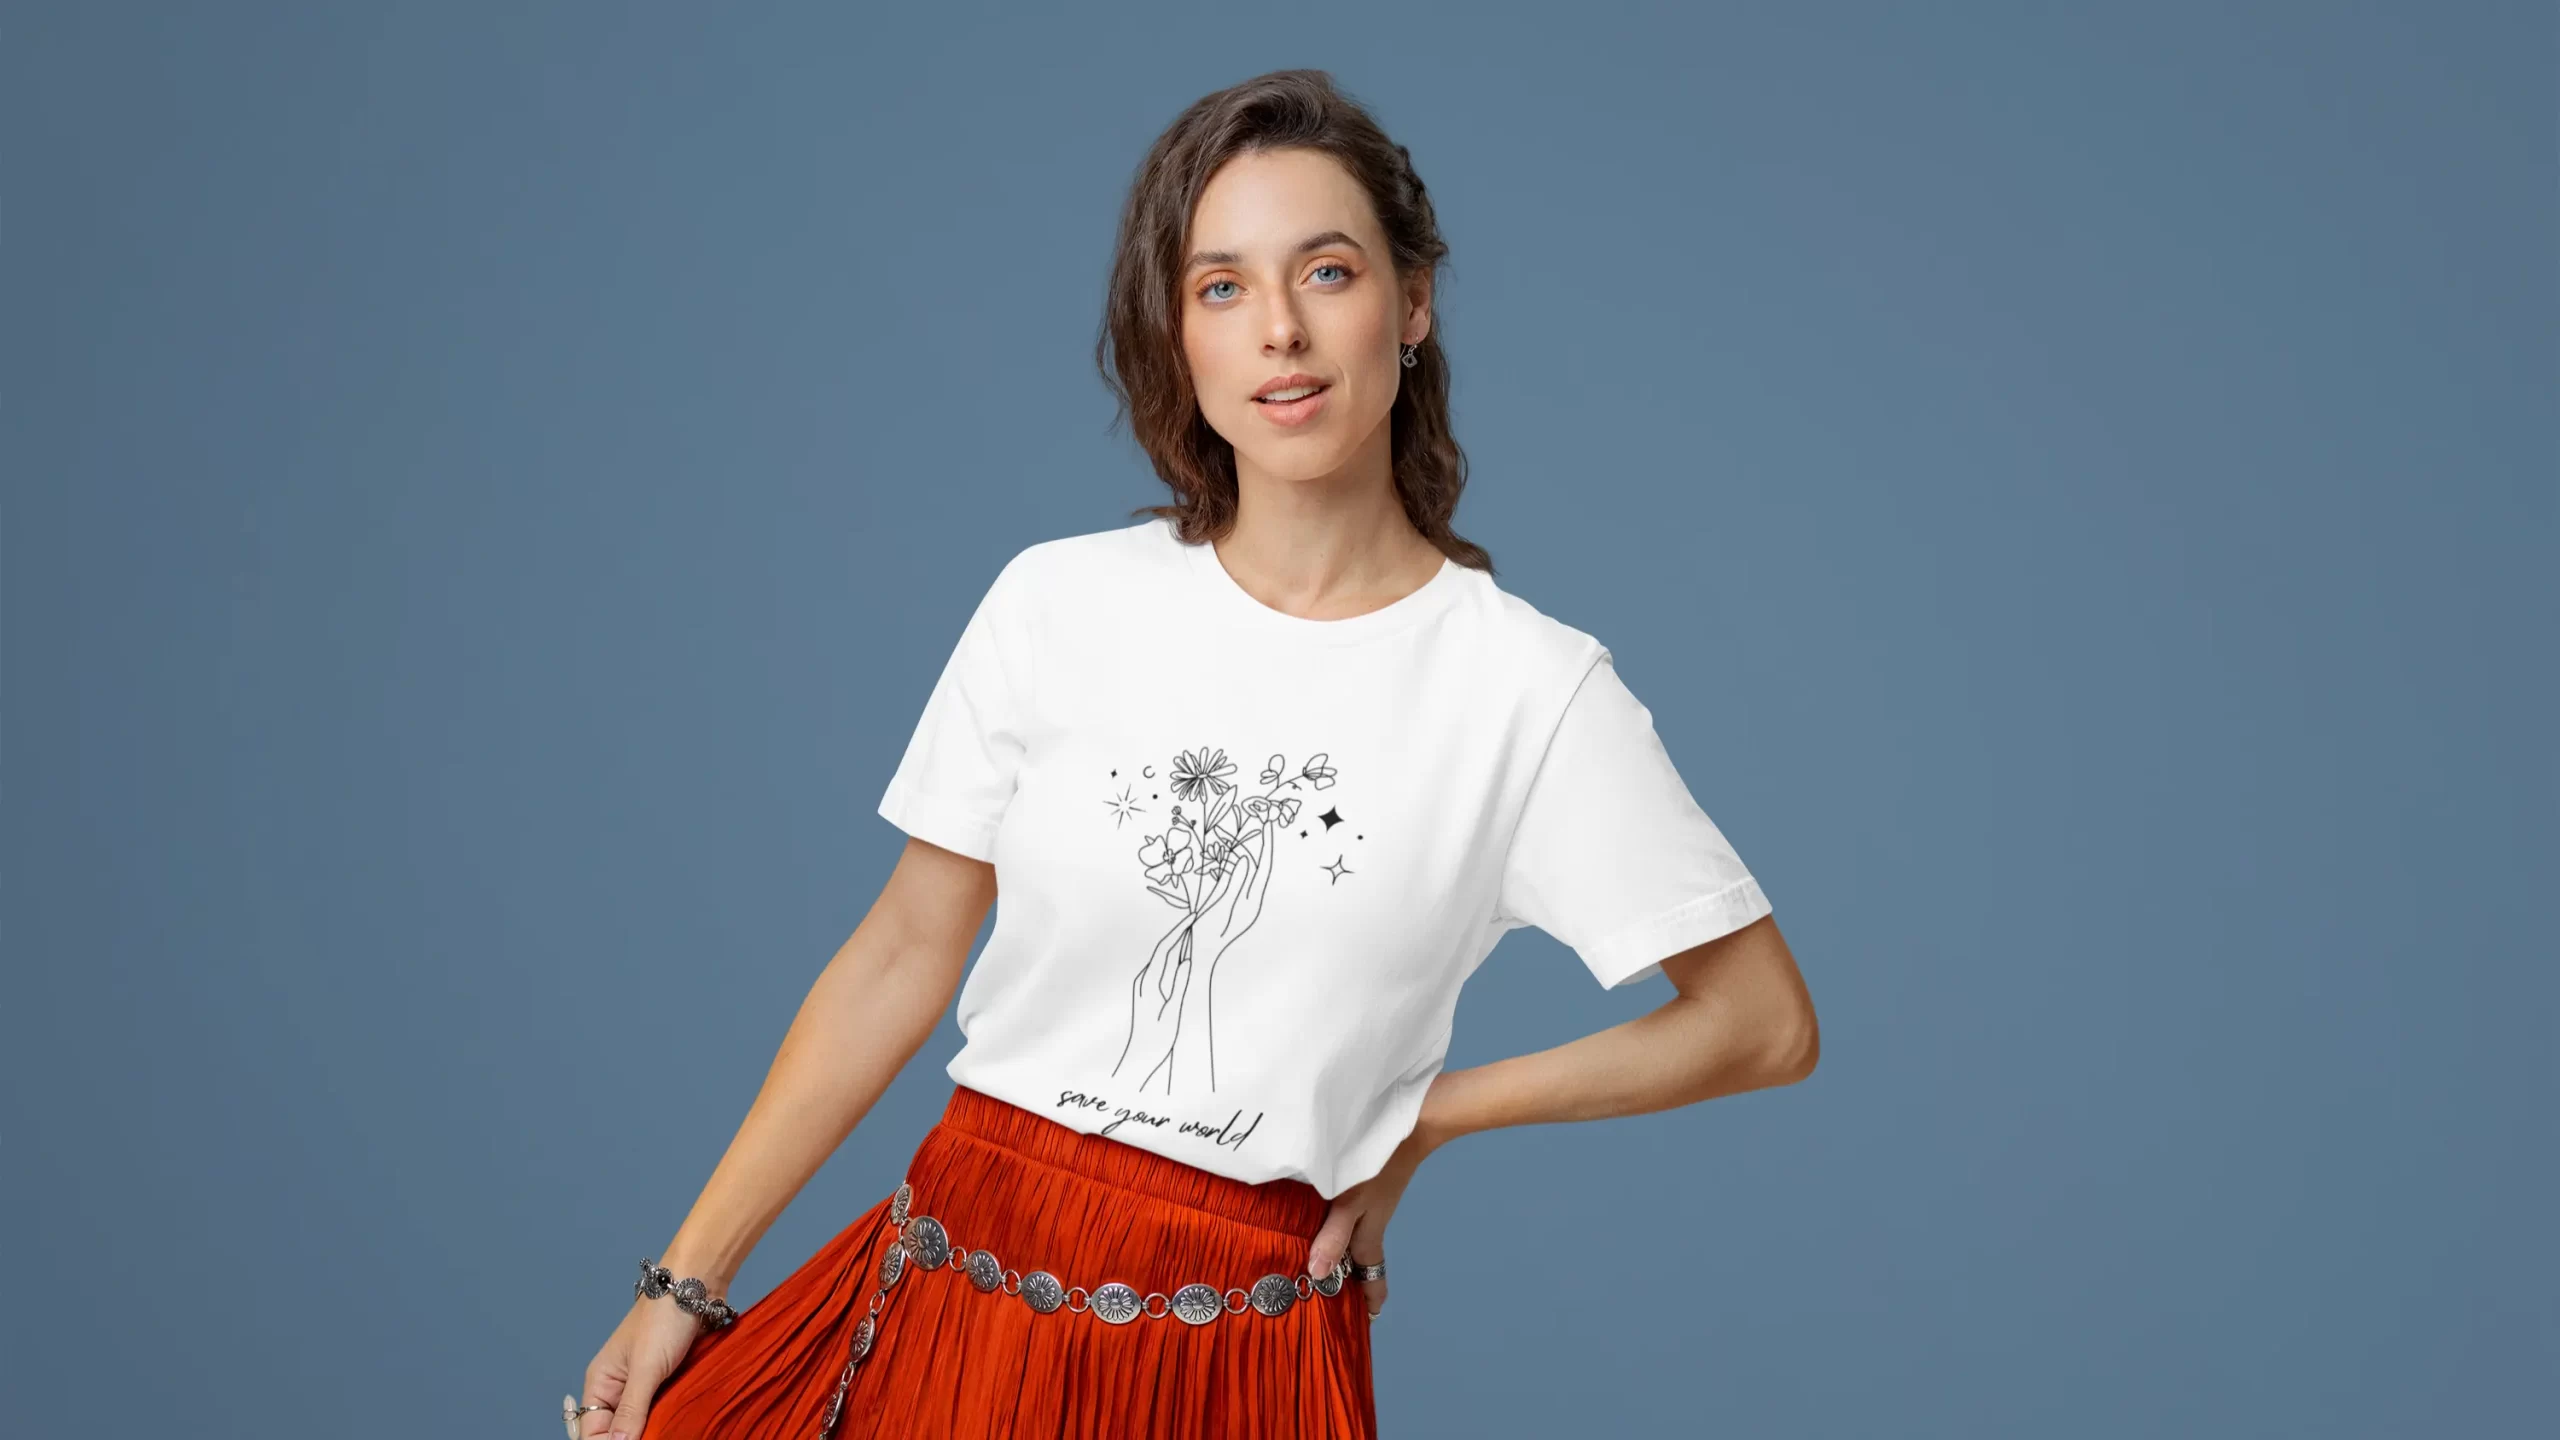 bella-canvas-tee-mockup-of-a-woman-wearing-a-boho-style-outfit-in-a-studio-m36863